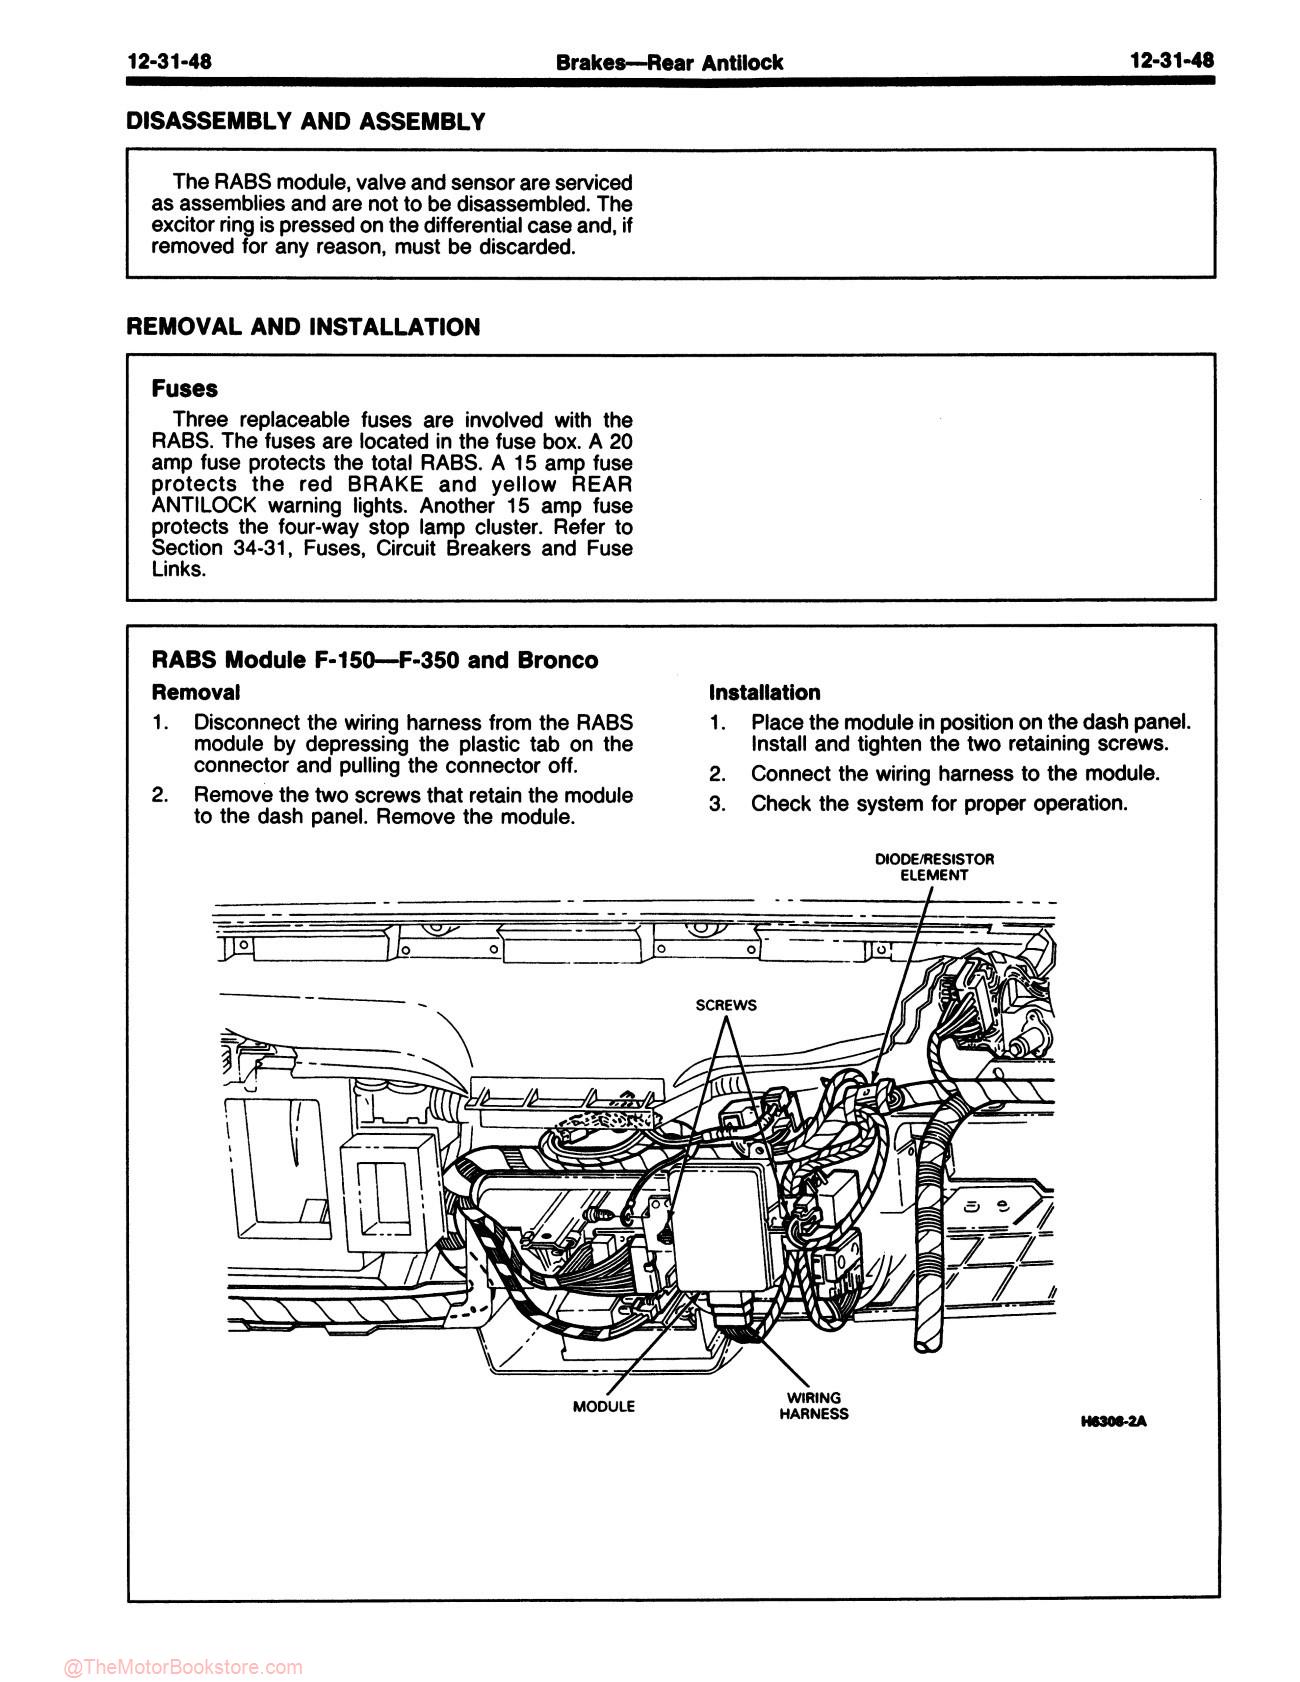 1990 Ford F-Series Truck & Bronco Electrical Vacuum Manual - Sample Page 1